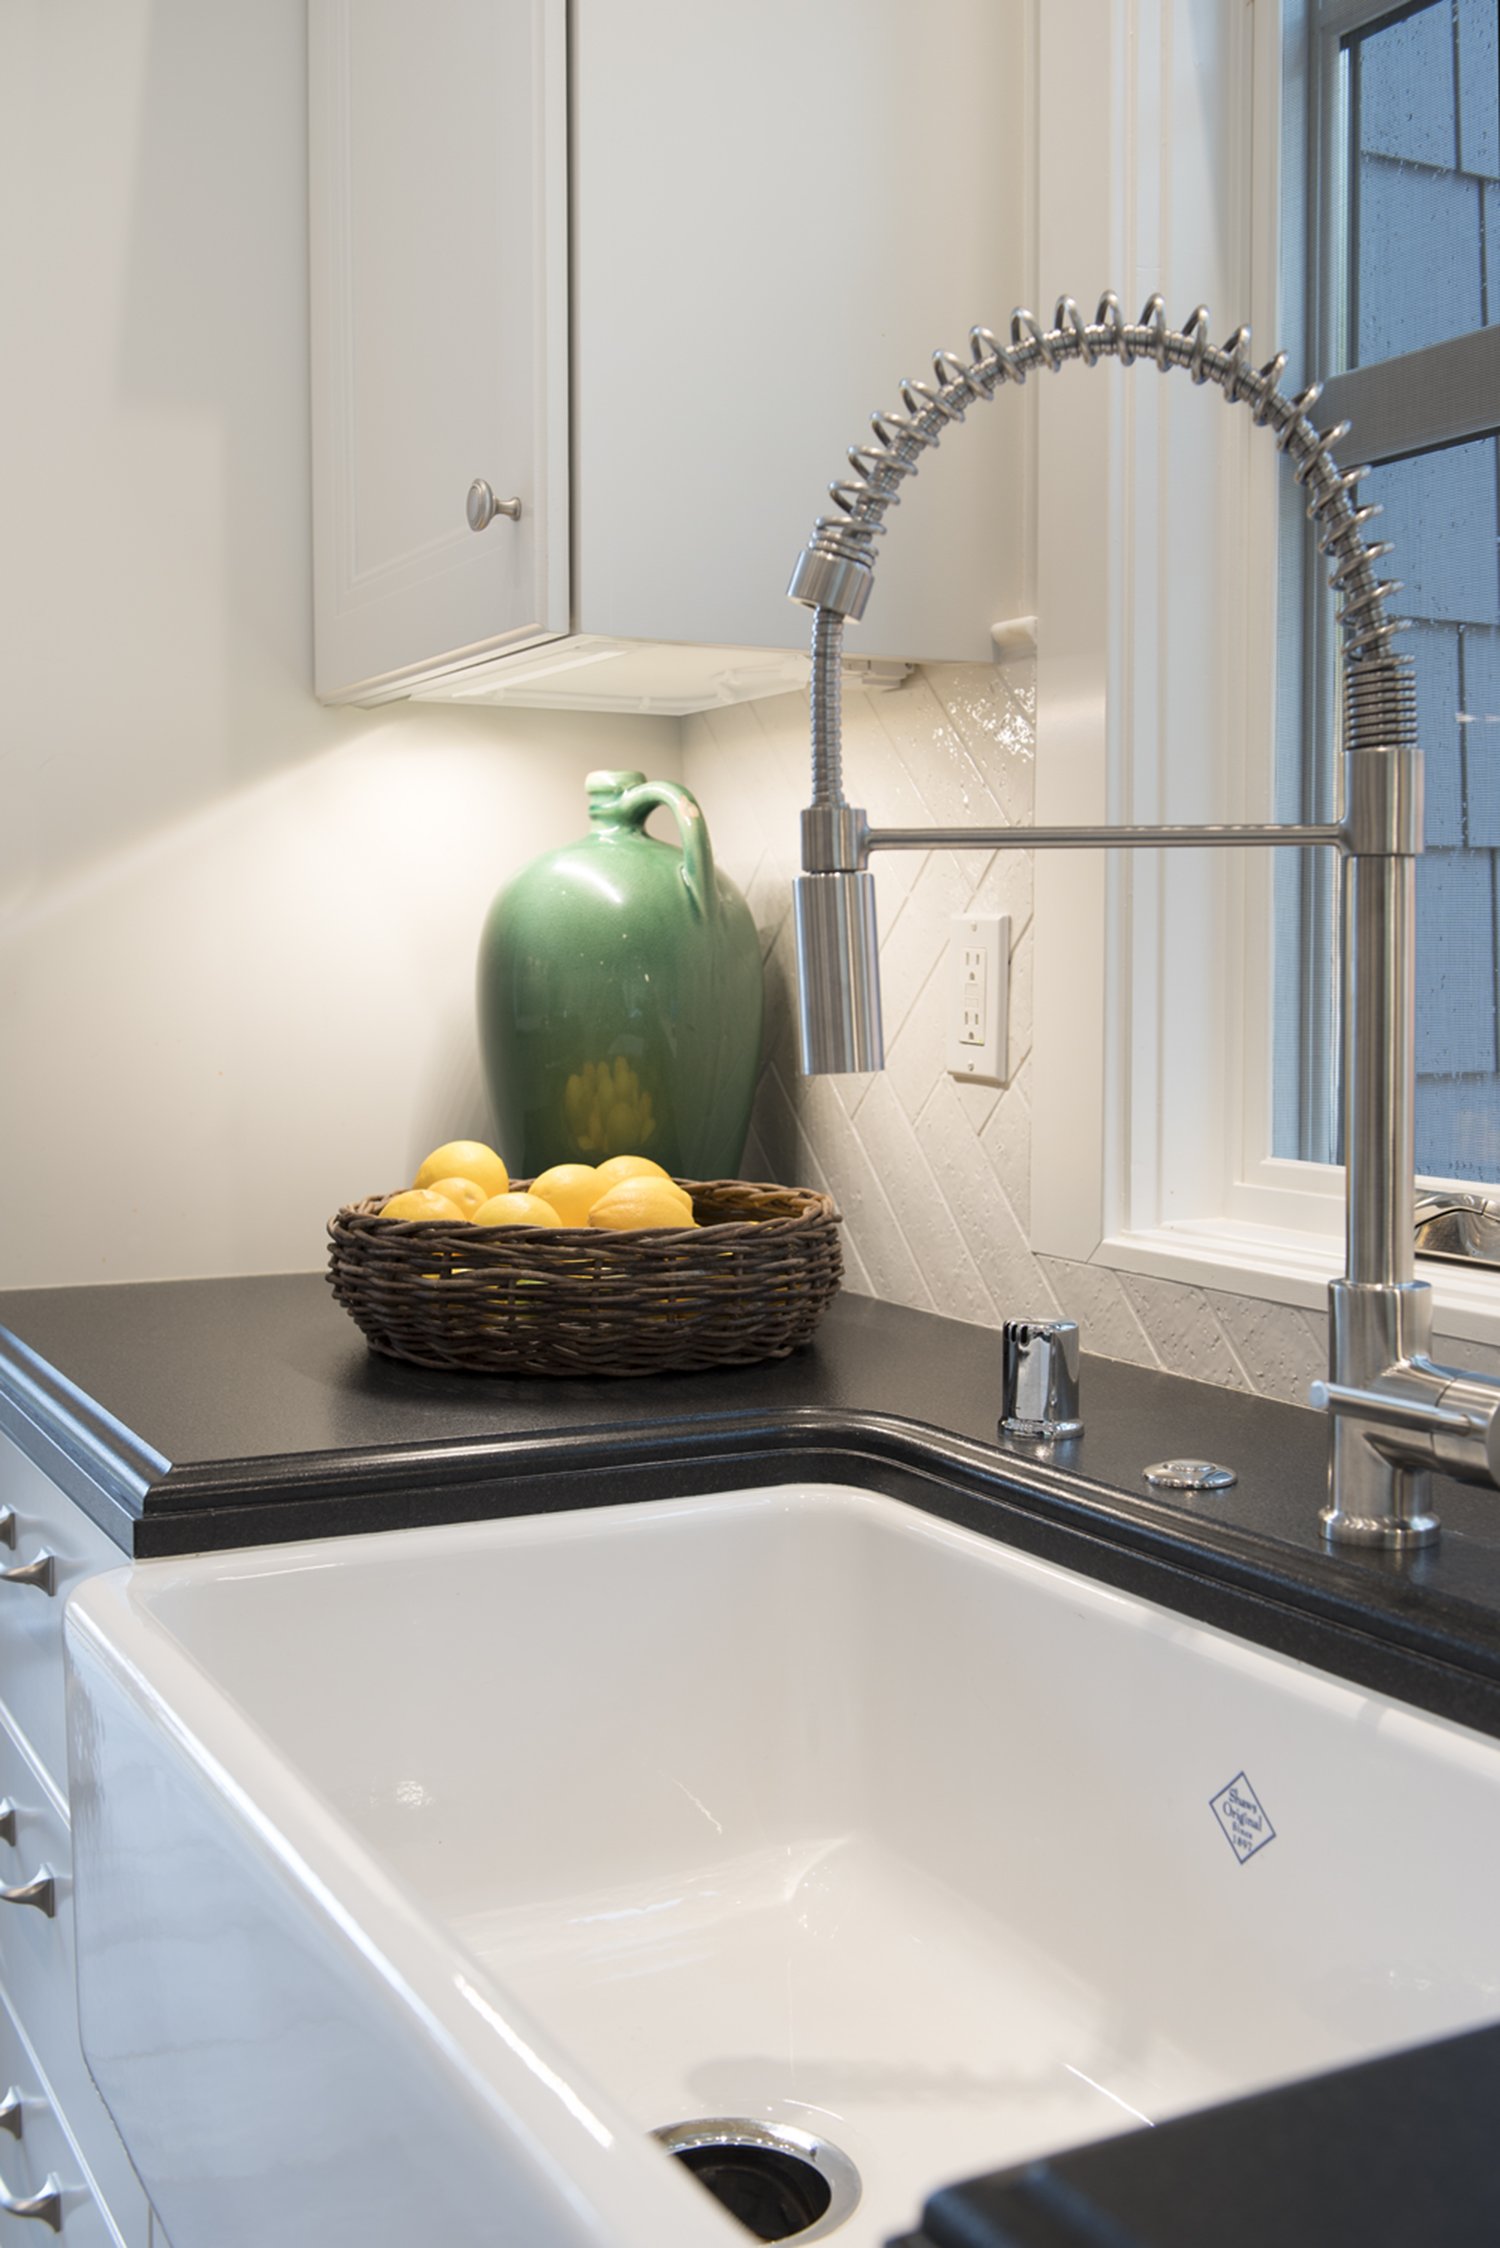  Farmhouse sink with a black countertop and silver faucet.  